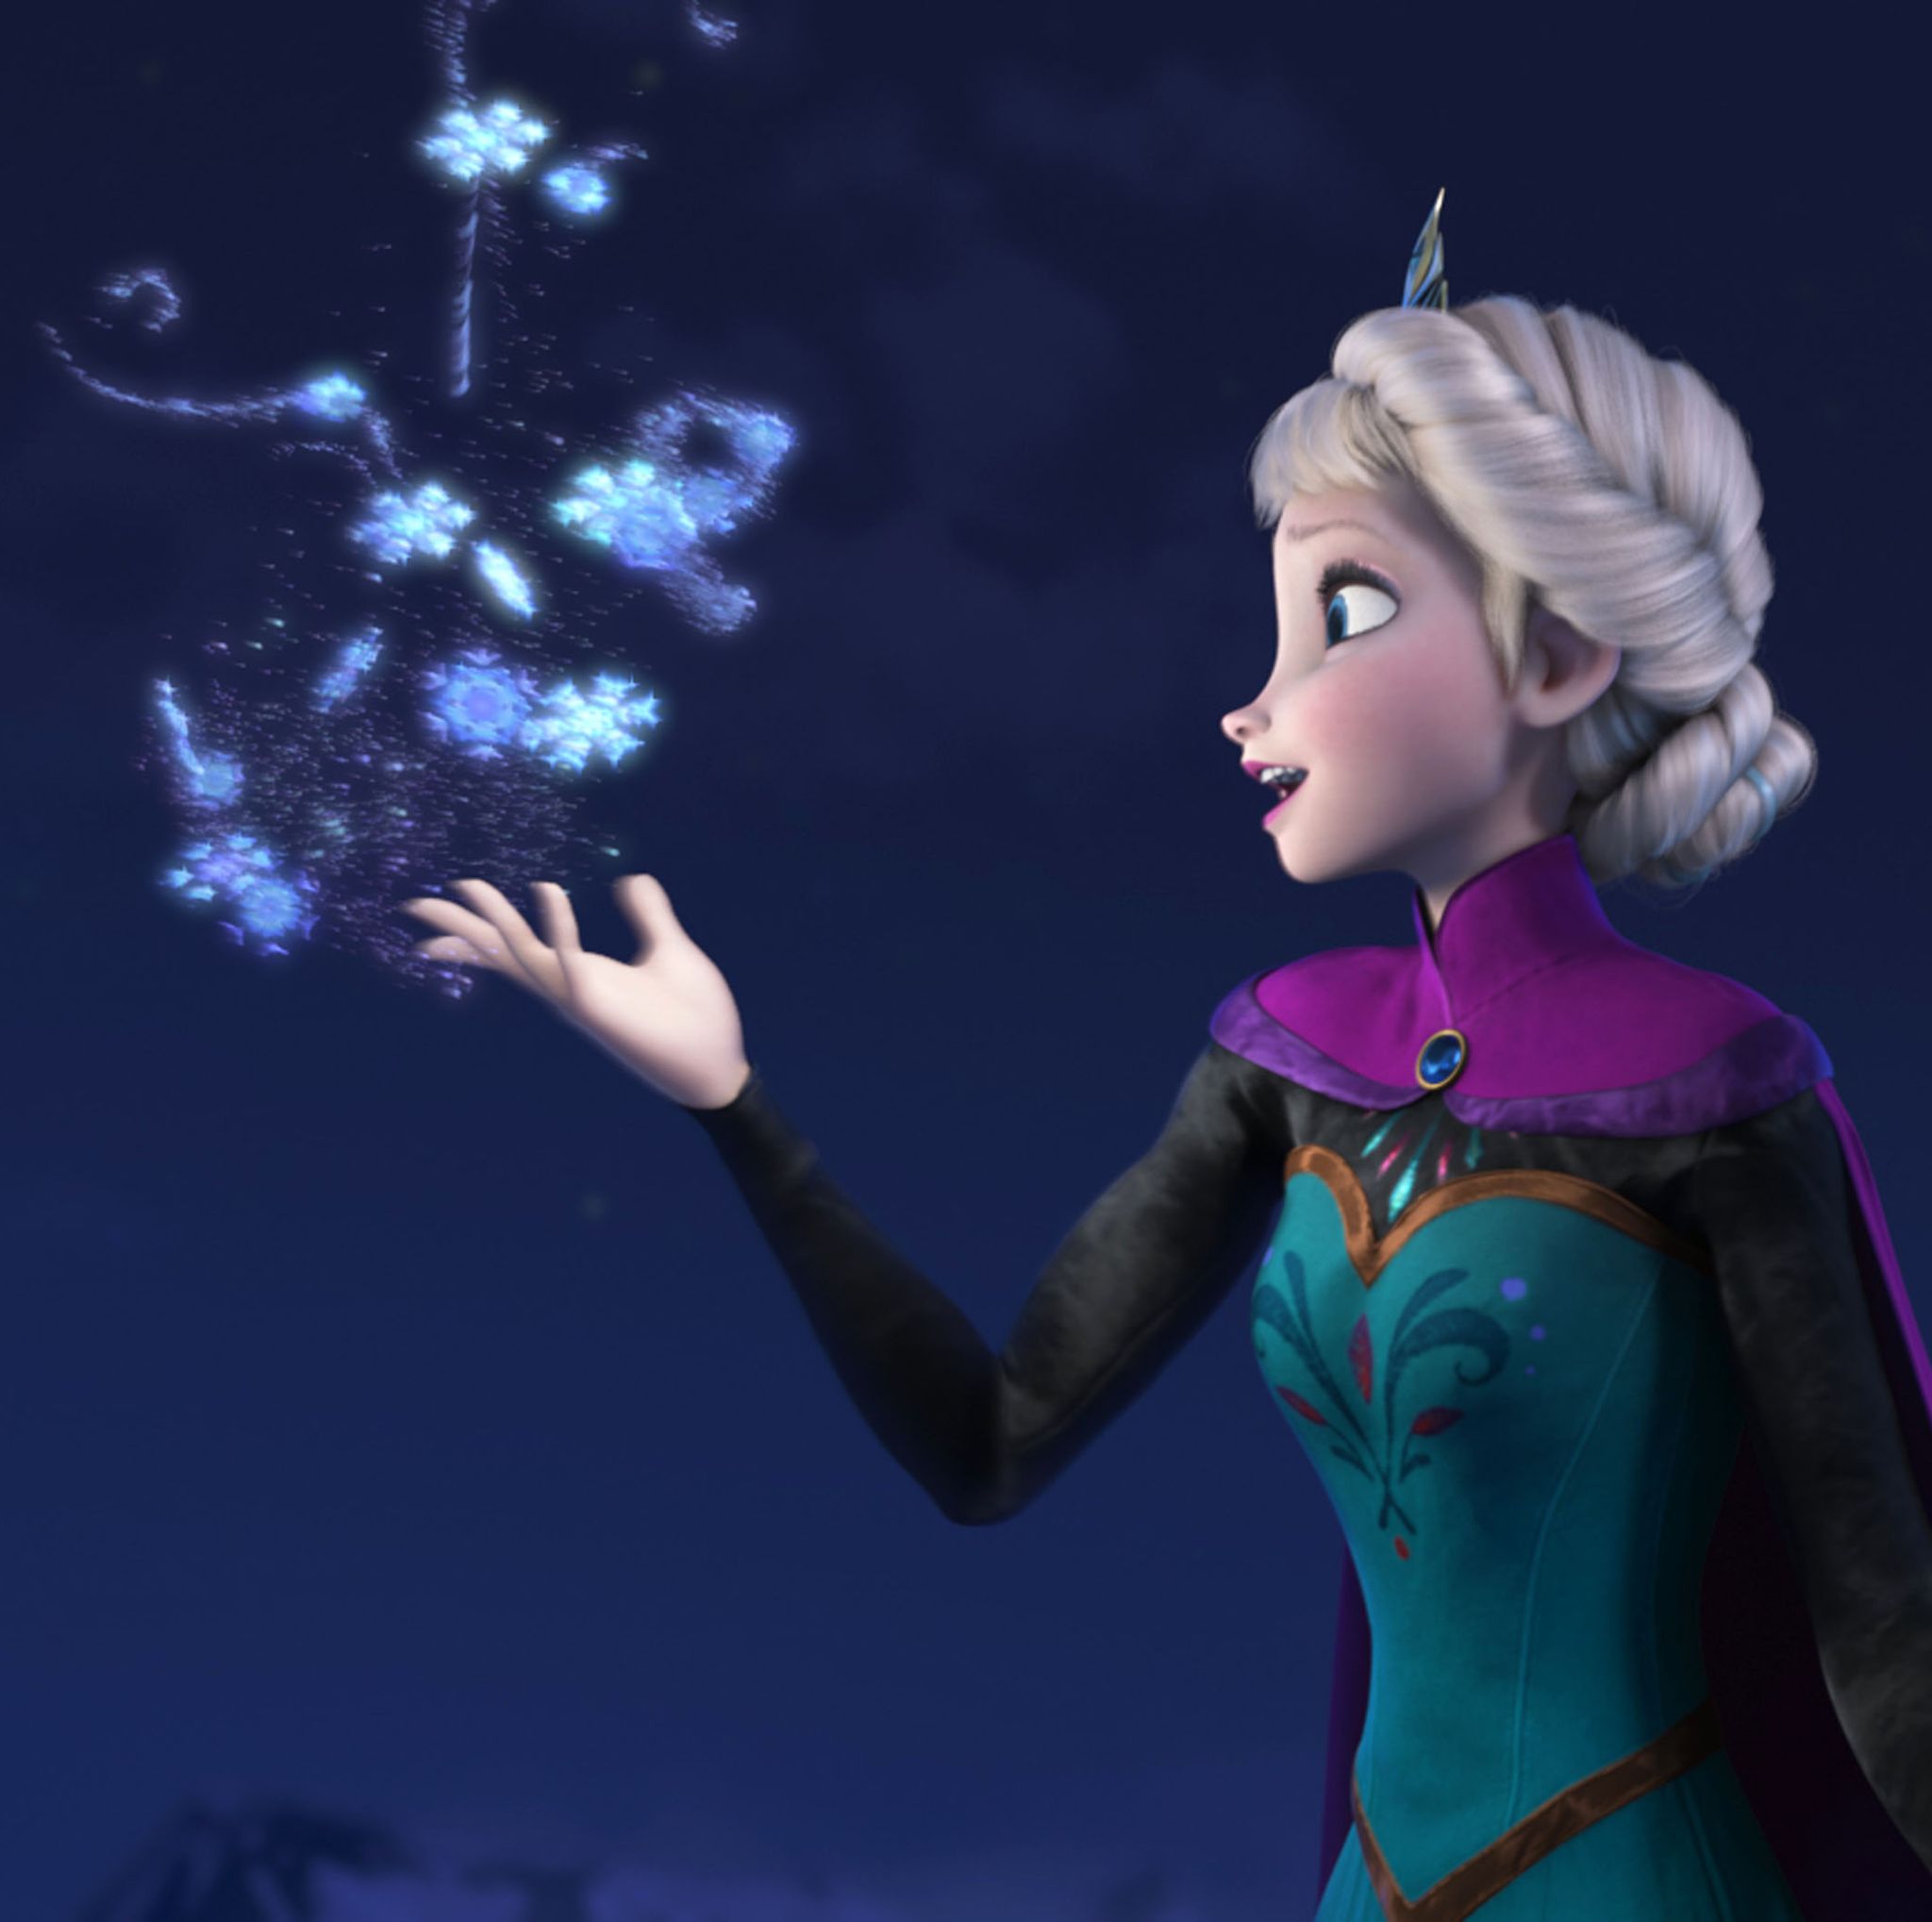 Frozen 2 doesn't have the next 'Let It Go